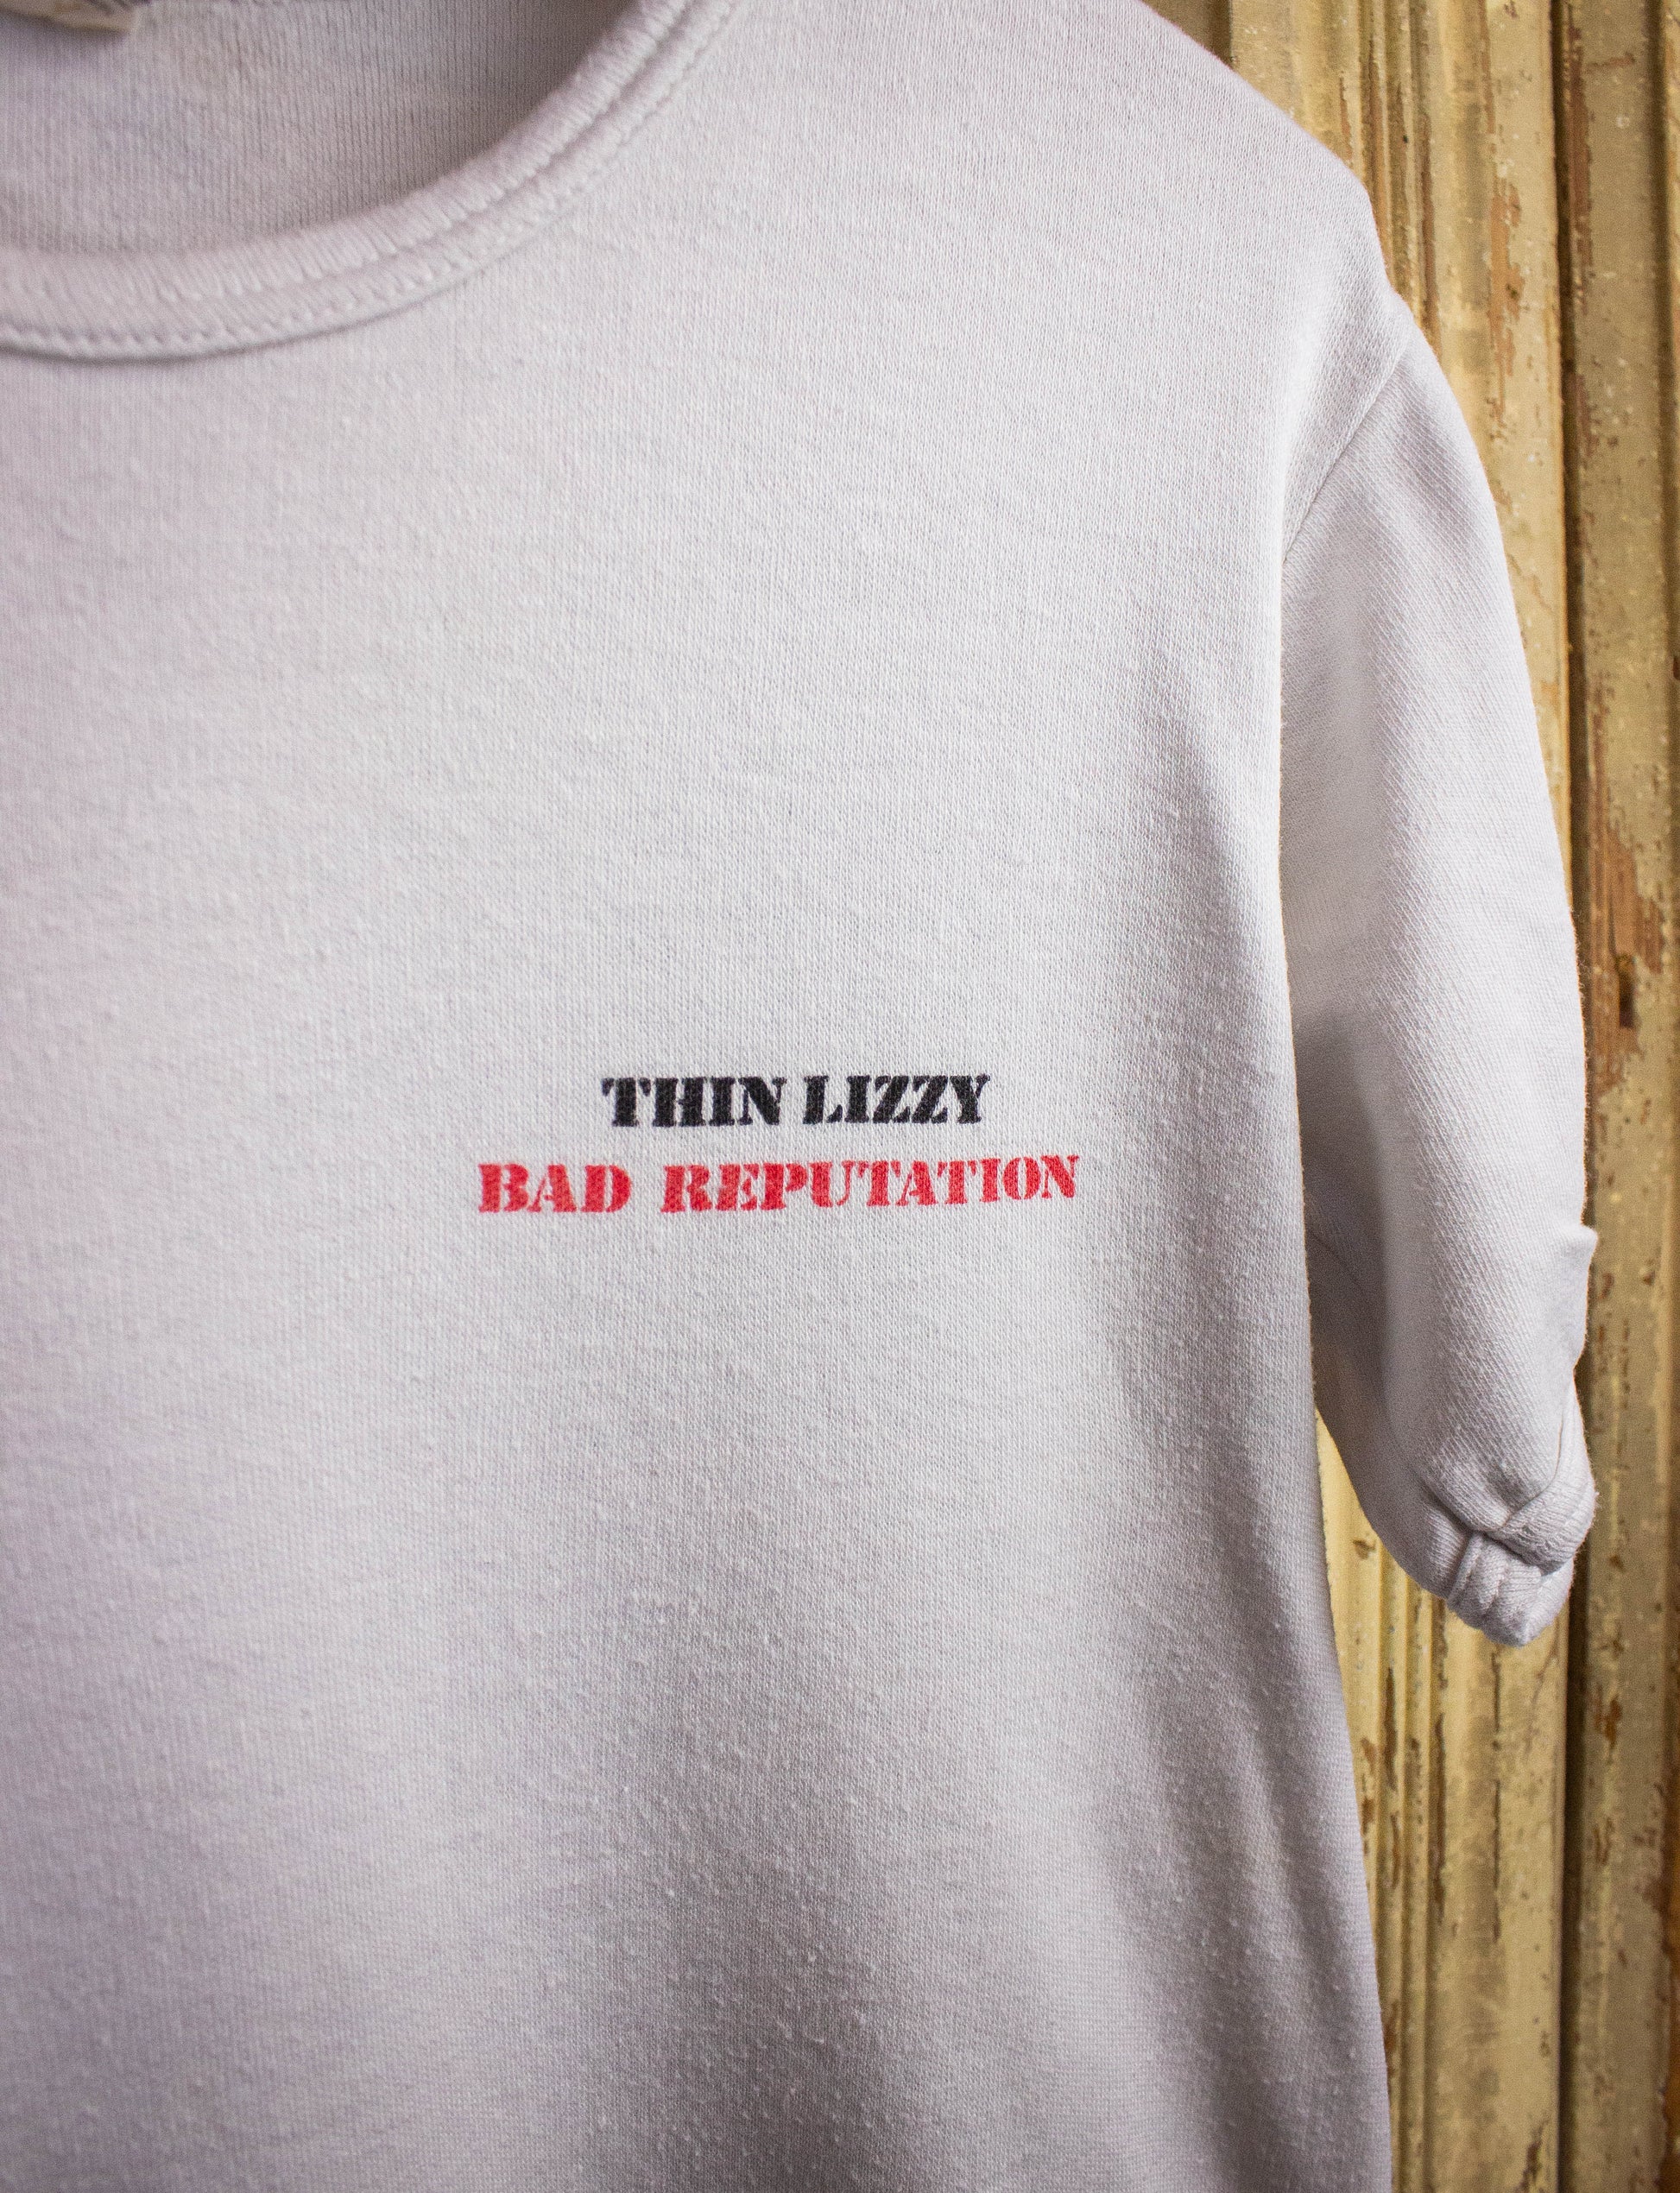 Vintage Thin Lizzy Bad Reputation Concert T Shirt 70s White Large